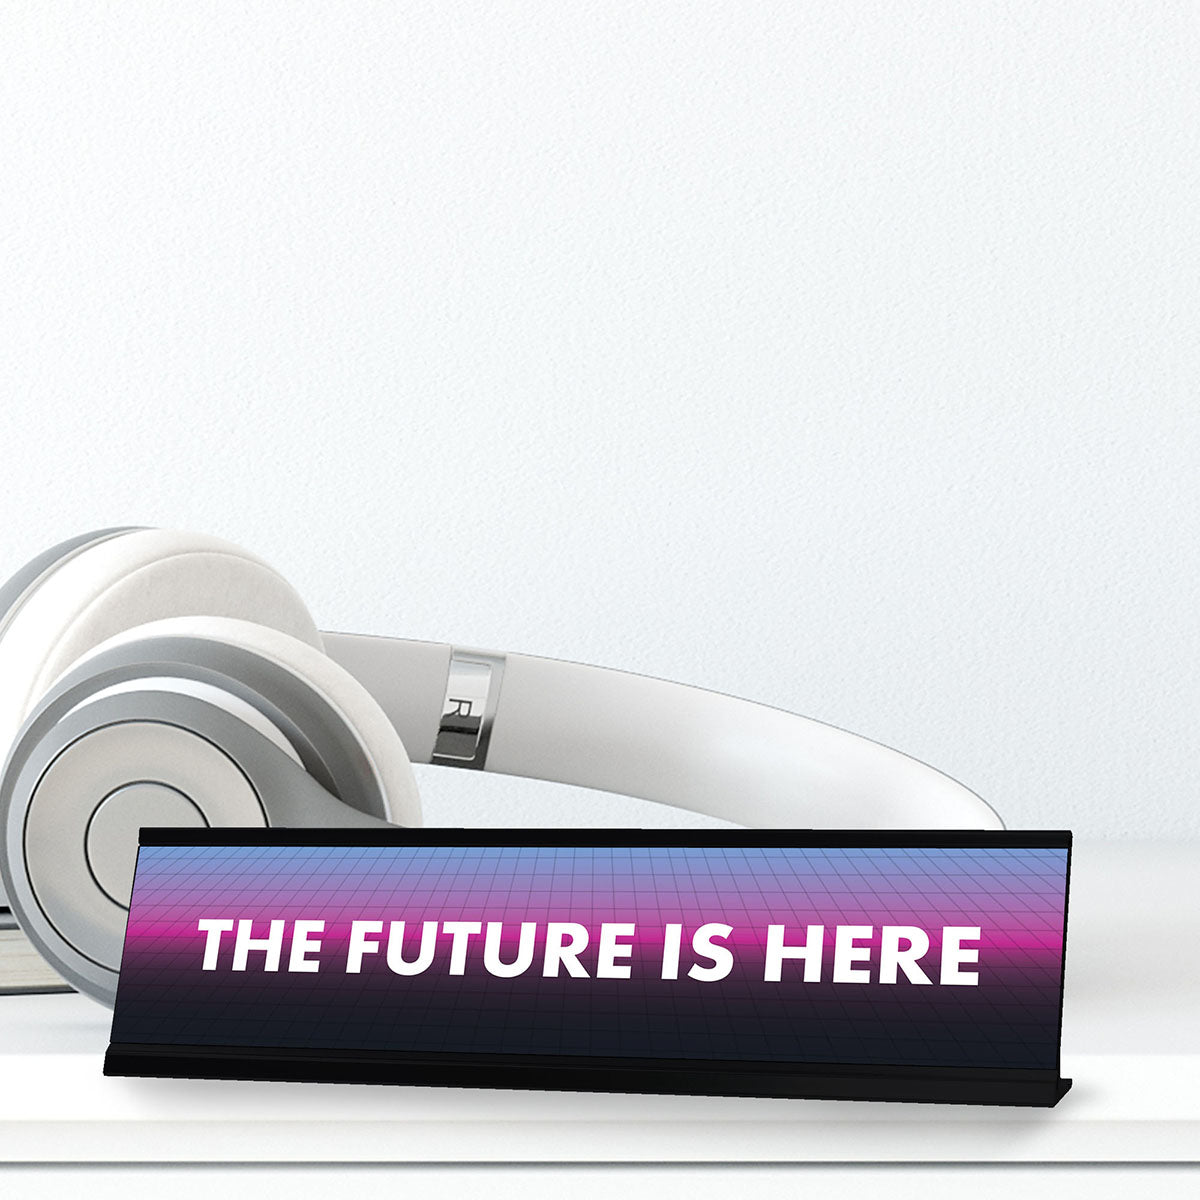 The Future is Here, Designer Series Desk Sign, Novelty Nameplate (2 x 8")